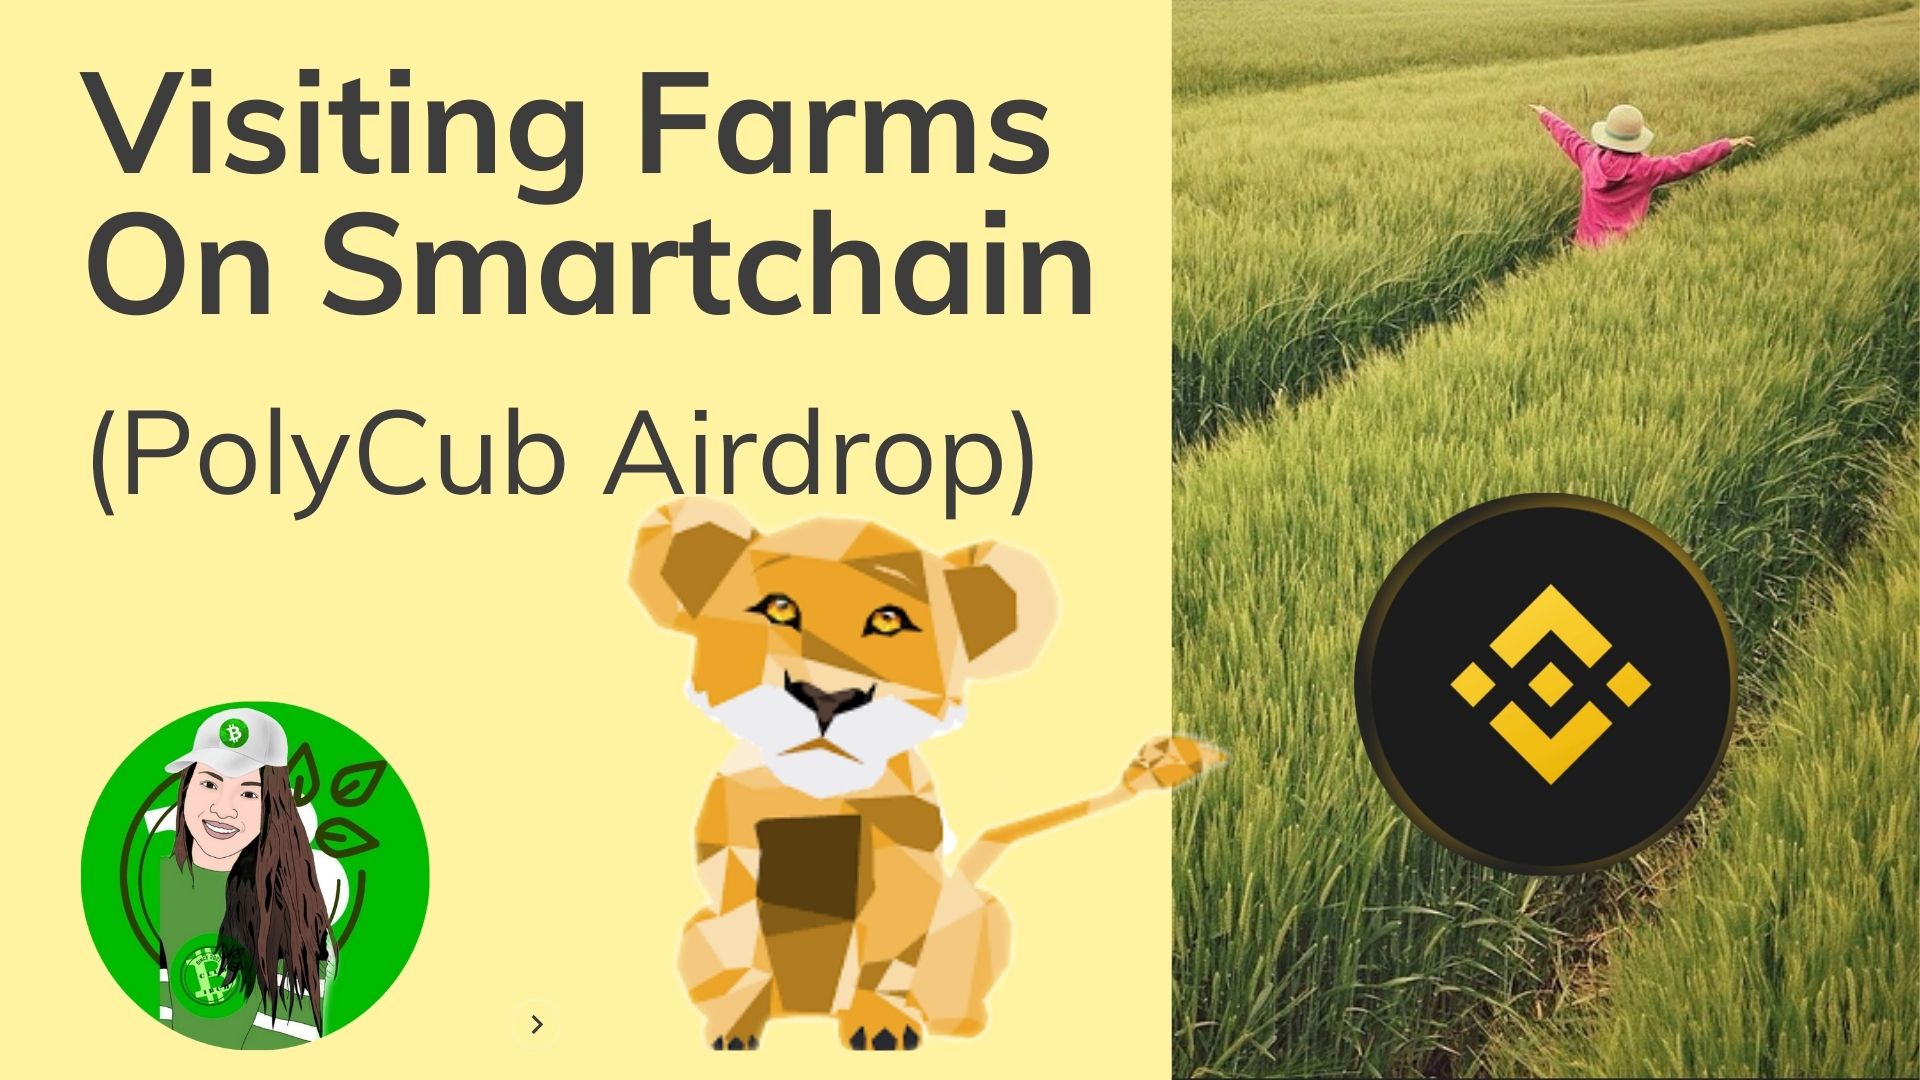 @jane1289/visiting-farms-on-smartchain-polycub-airdrop